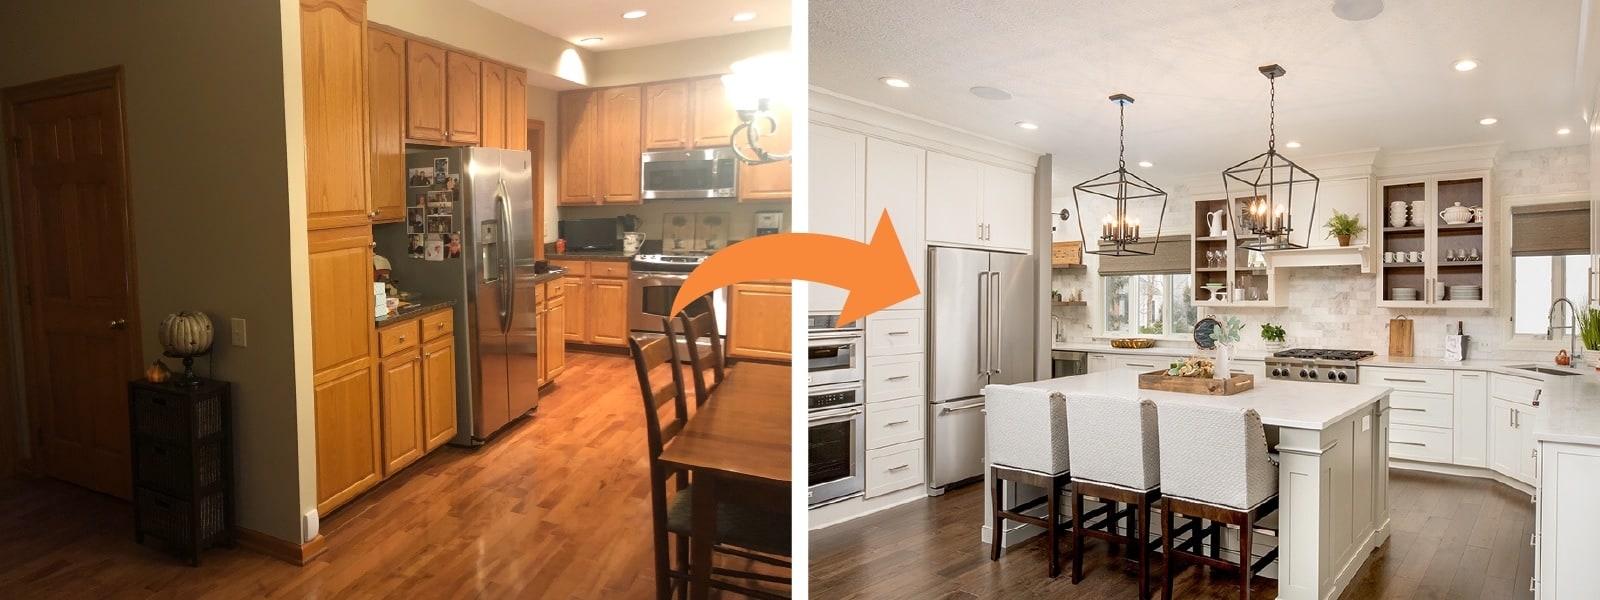 An before and after of a perfect kitchen remodel.